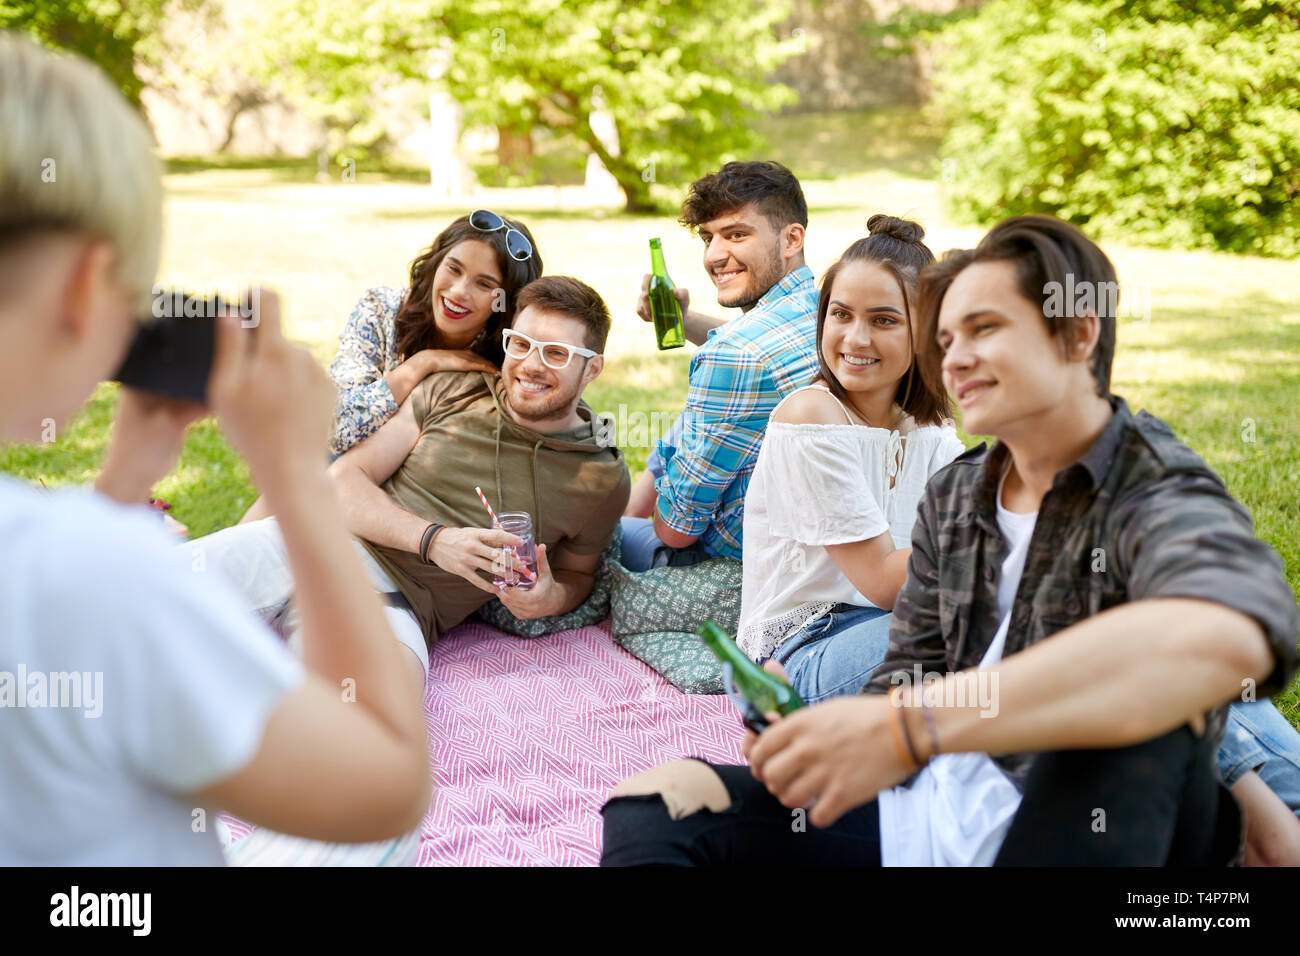 friendship, leisure and technology concept - woman with camera photographing his friends drinking non alcoholic drinks at picnic in summer park Stock Photo